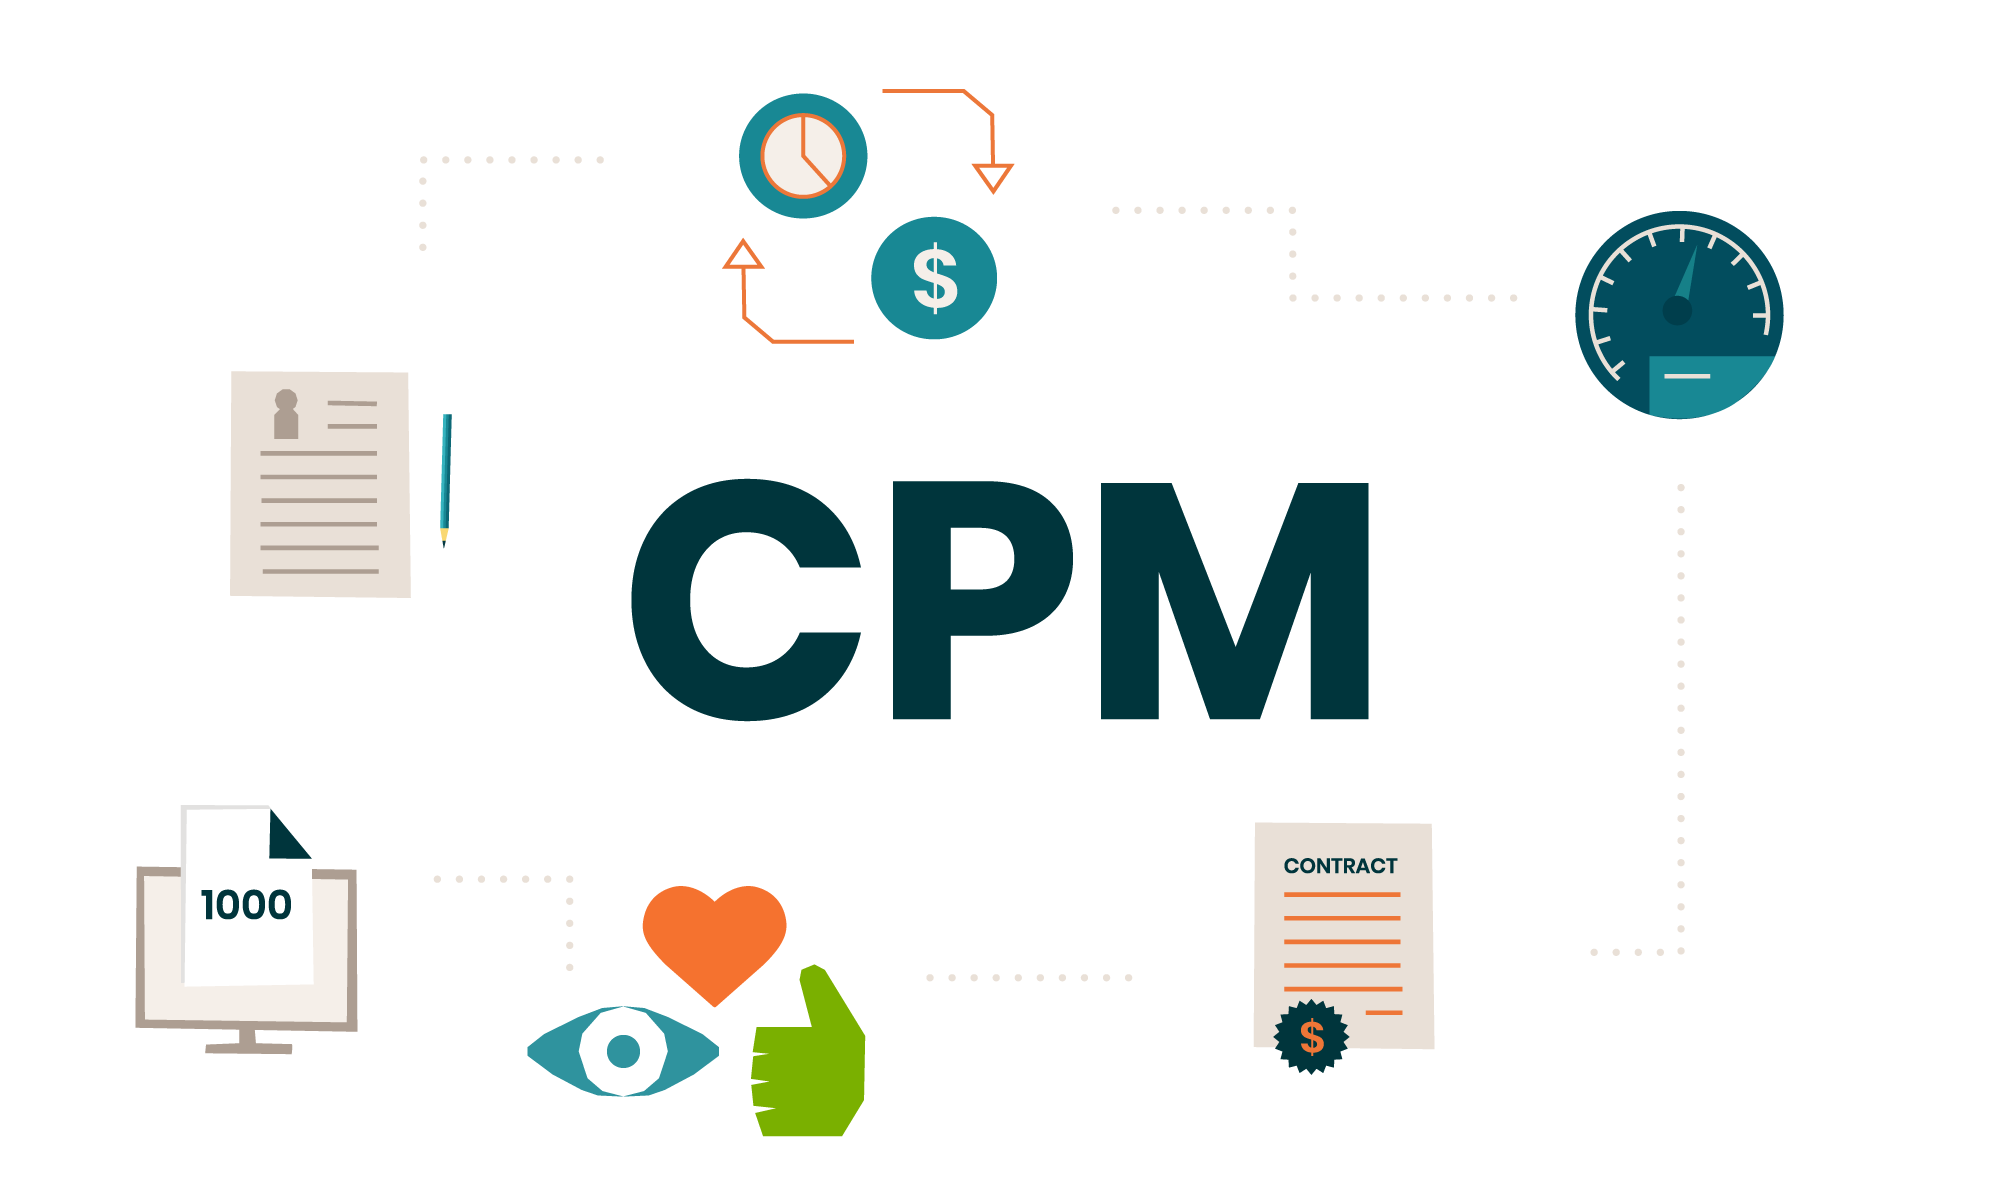 The importance of CPM for an advertising campaign